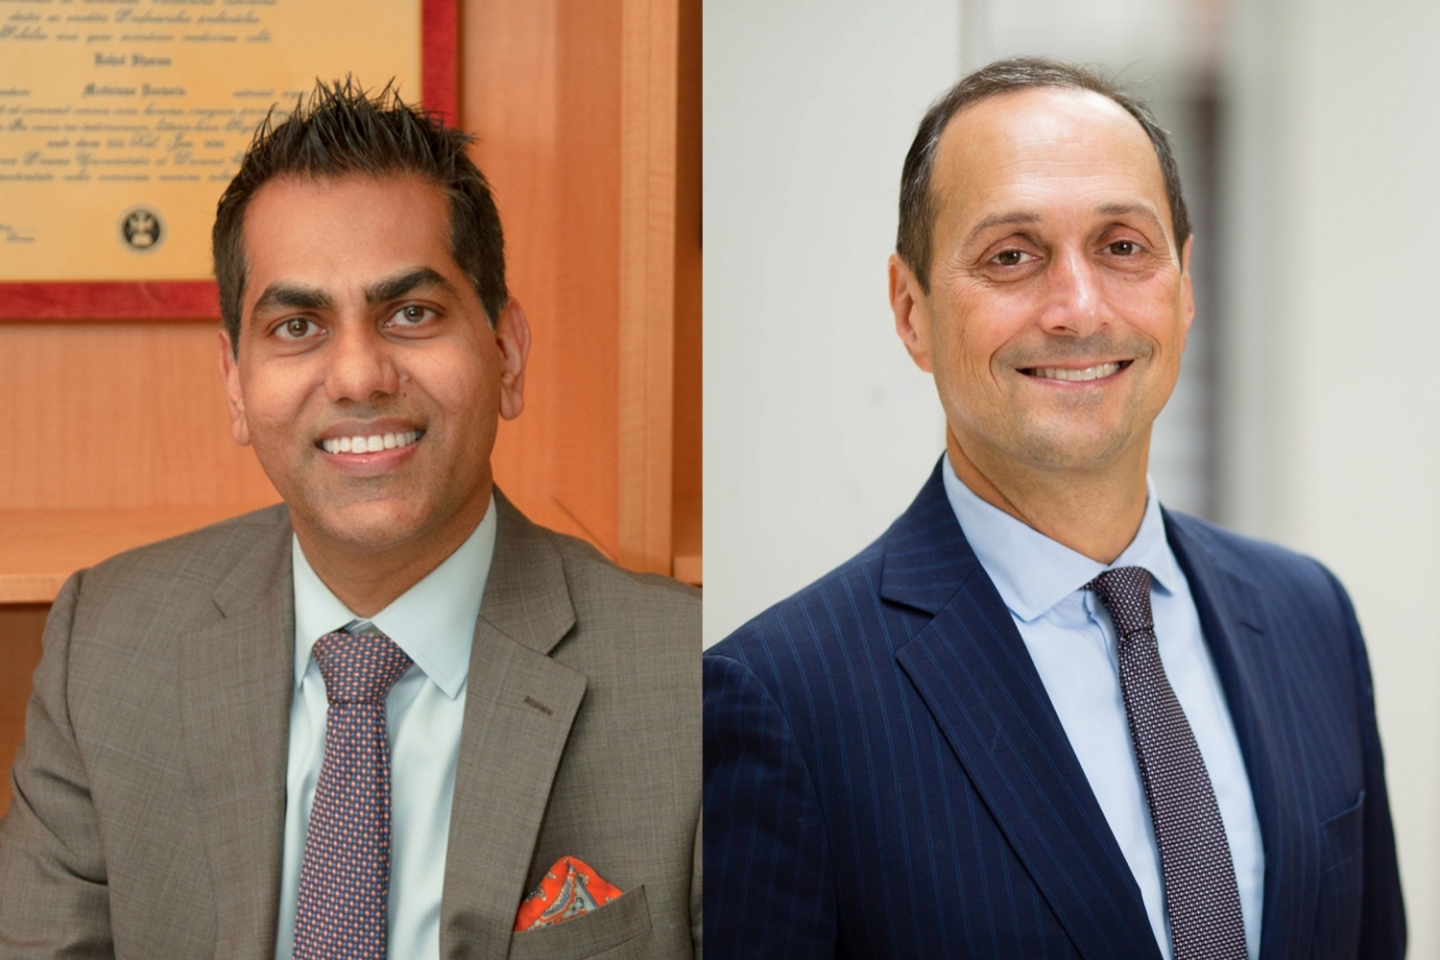 Composite photo of Dr. Rahul Sharma on the left and Dr. Adam Stracher on the right, both from Weill Cornell Medicine